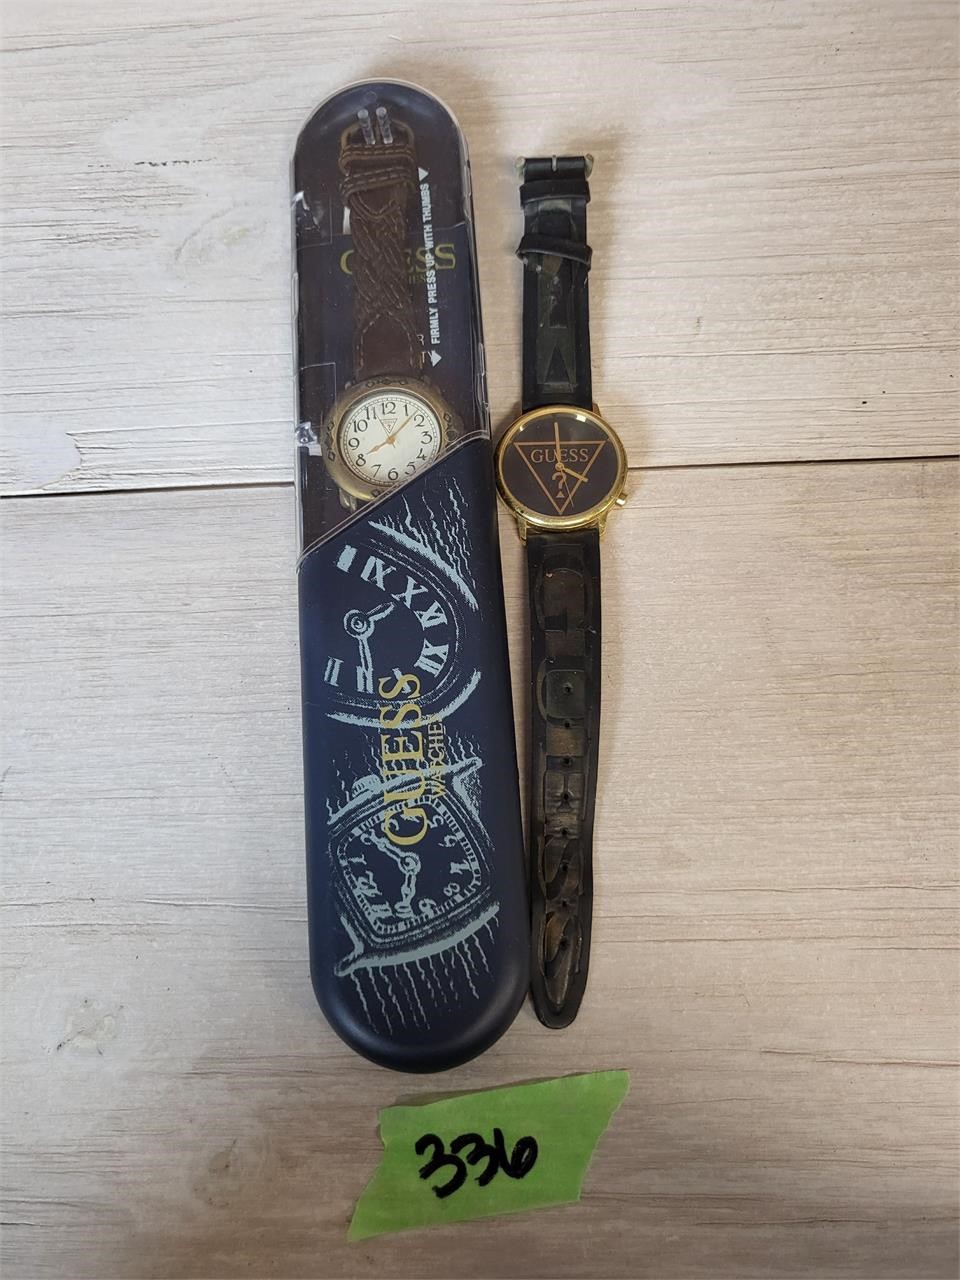 2 guess watches